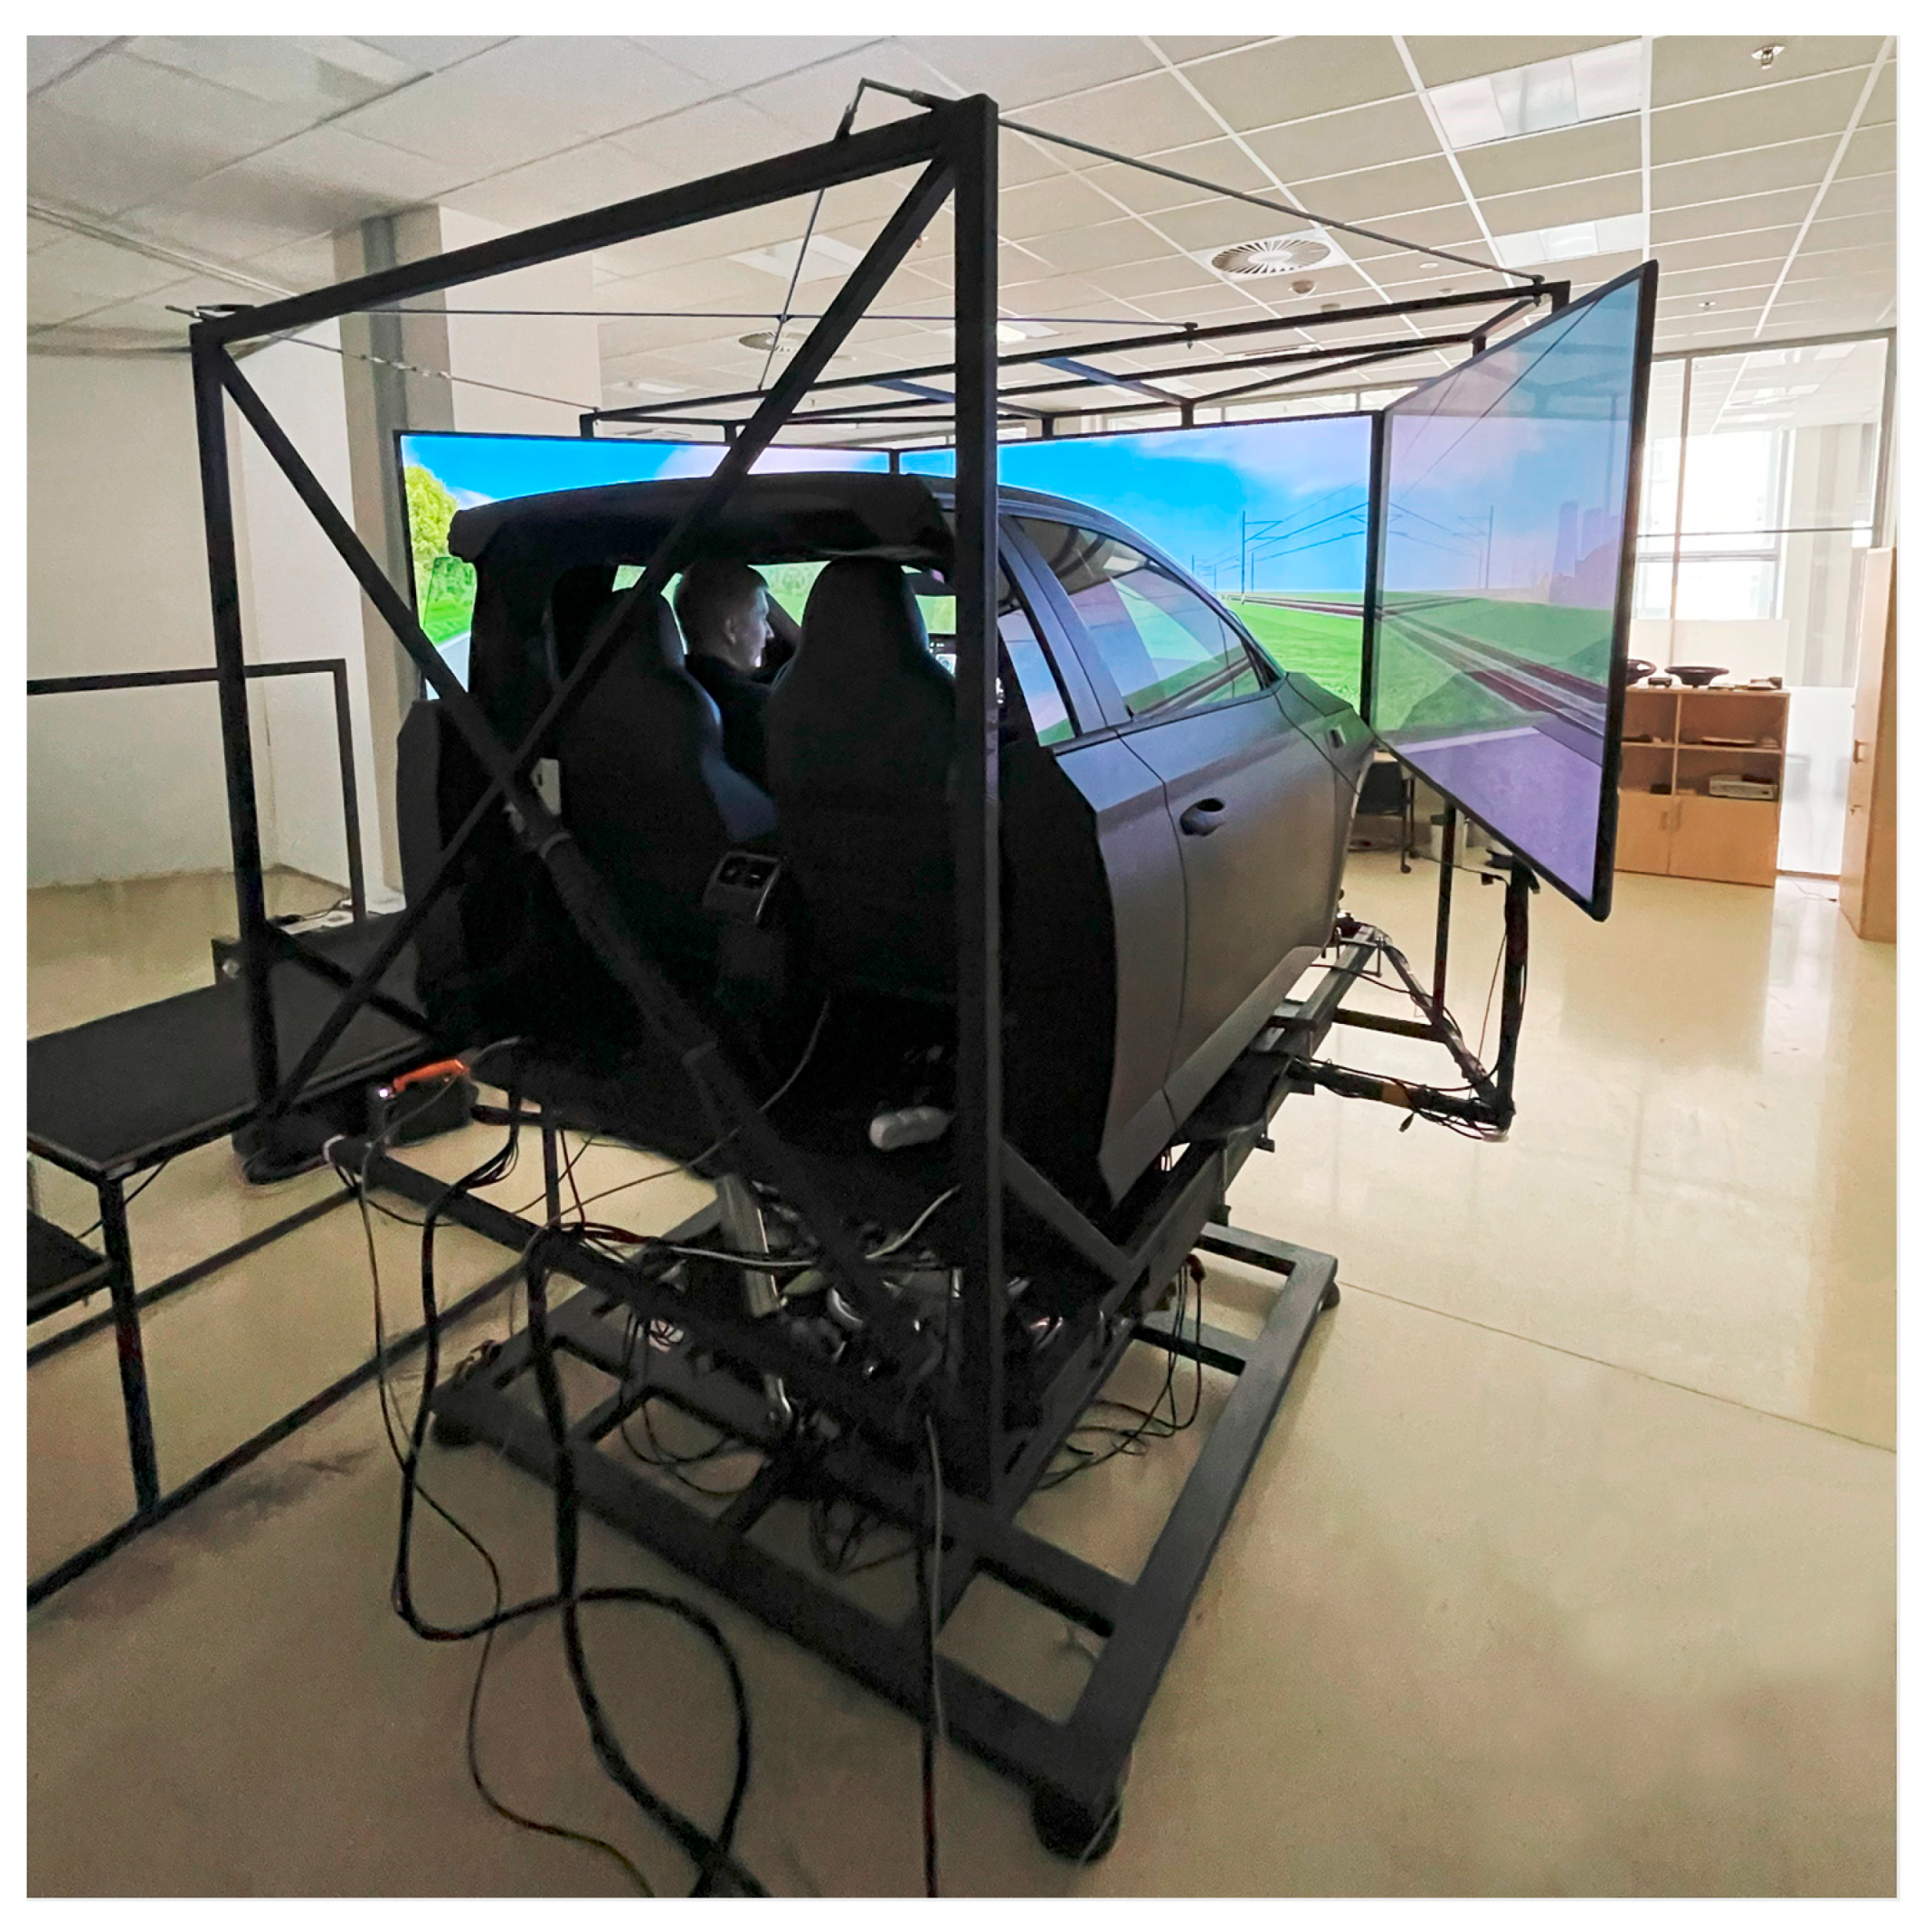 New Trends in Driving Simulators: The out-of-the-loop experience - Virtual  Vehicle